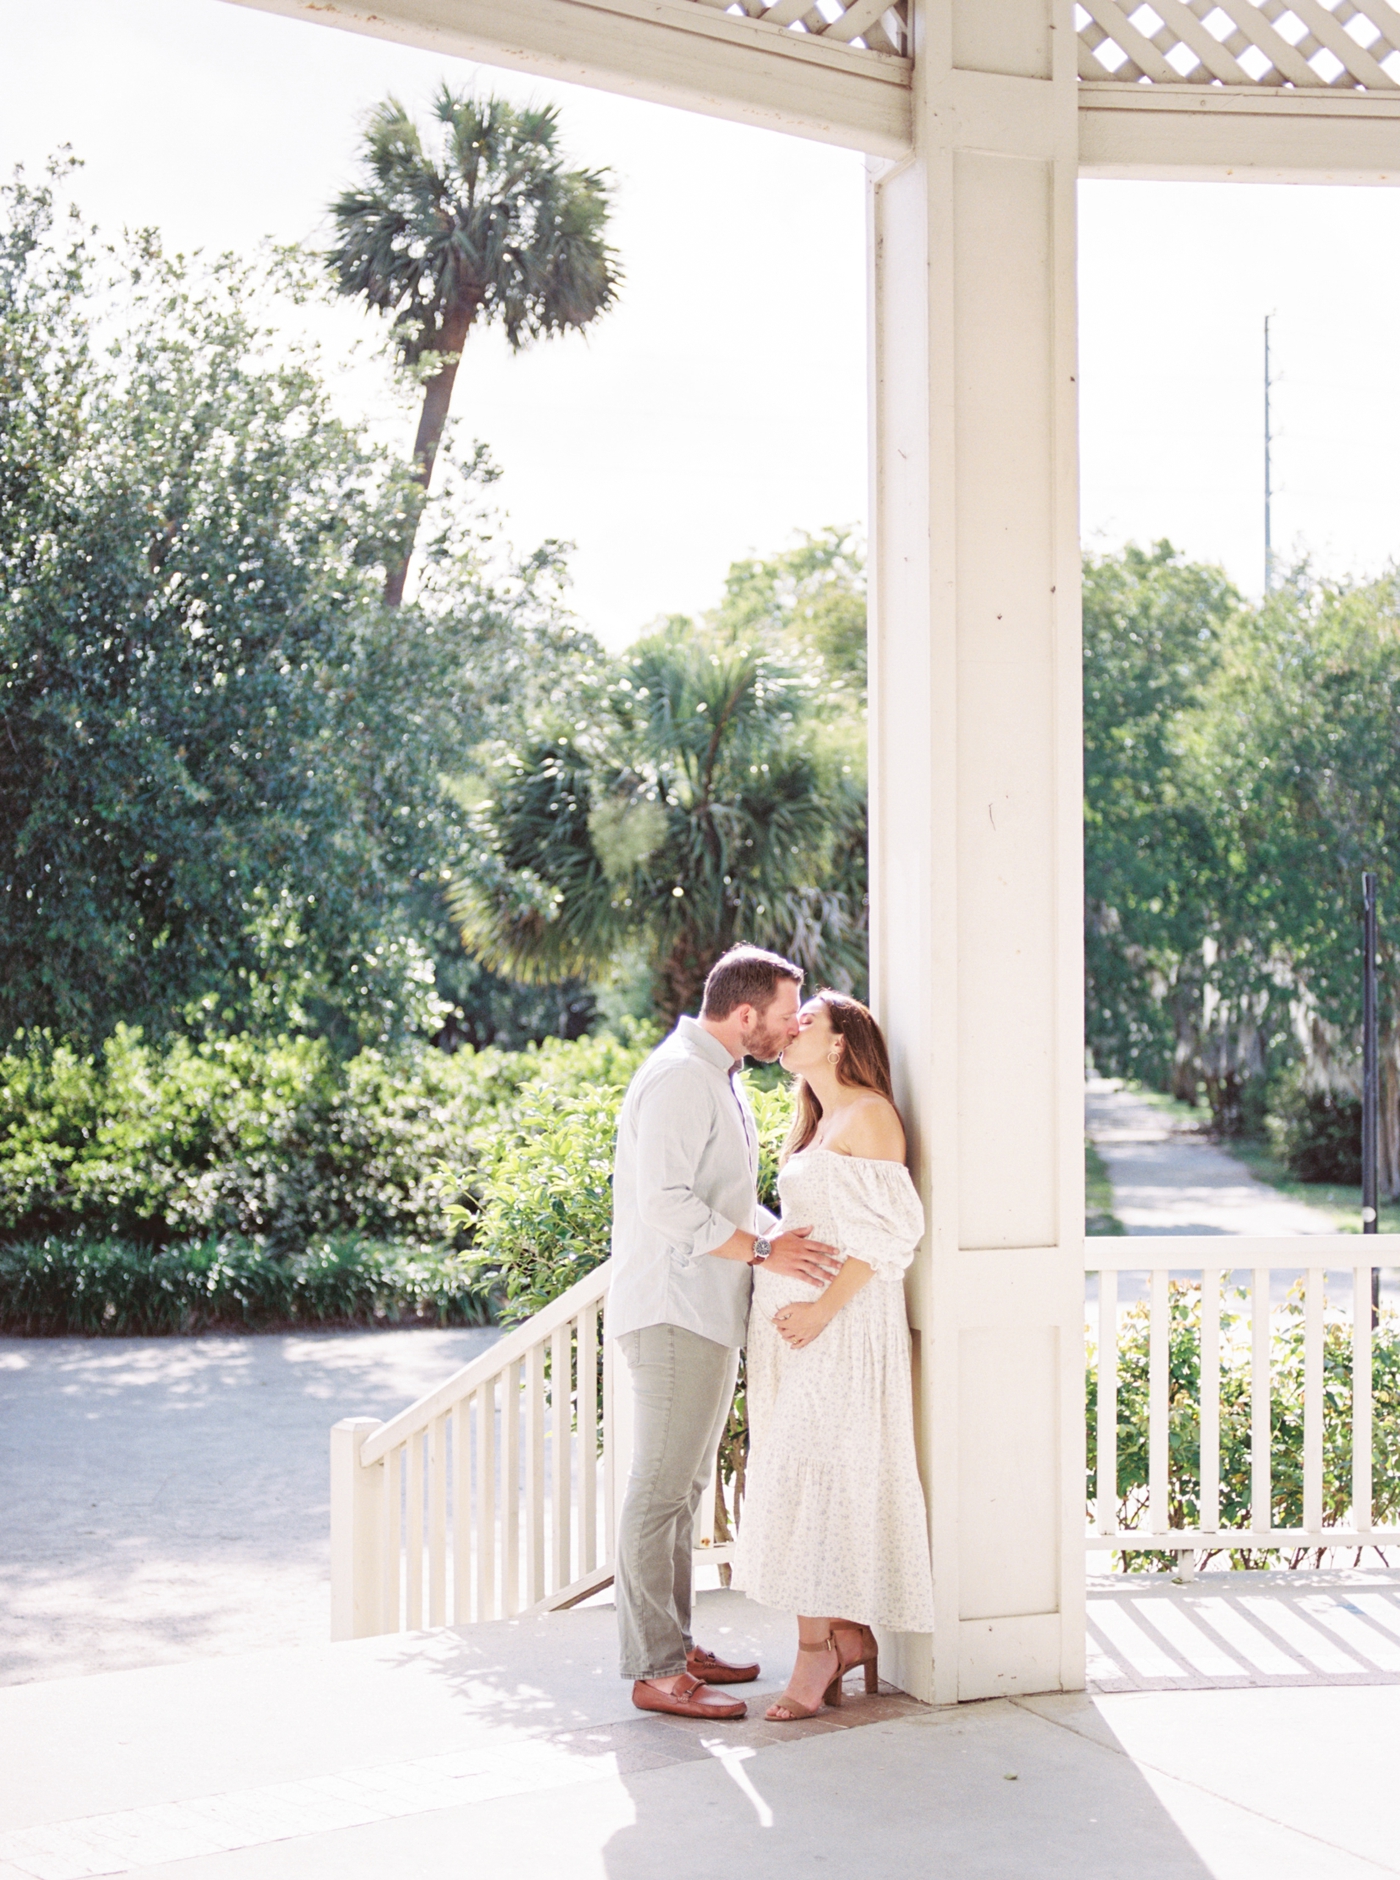 Mom and dad to be kissing under a gazebo | Photo by Caitlyn Motycka Photography.